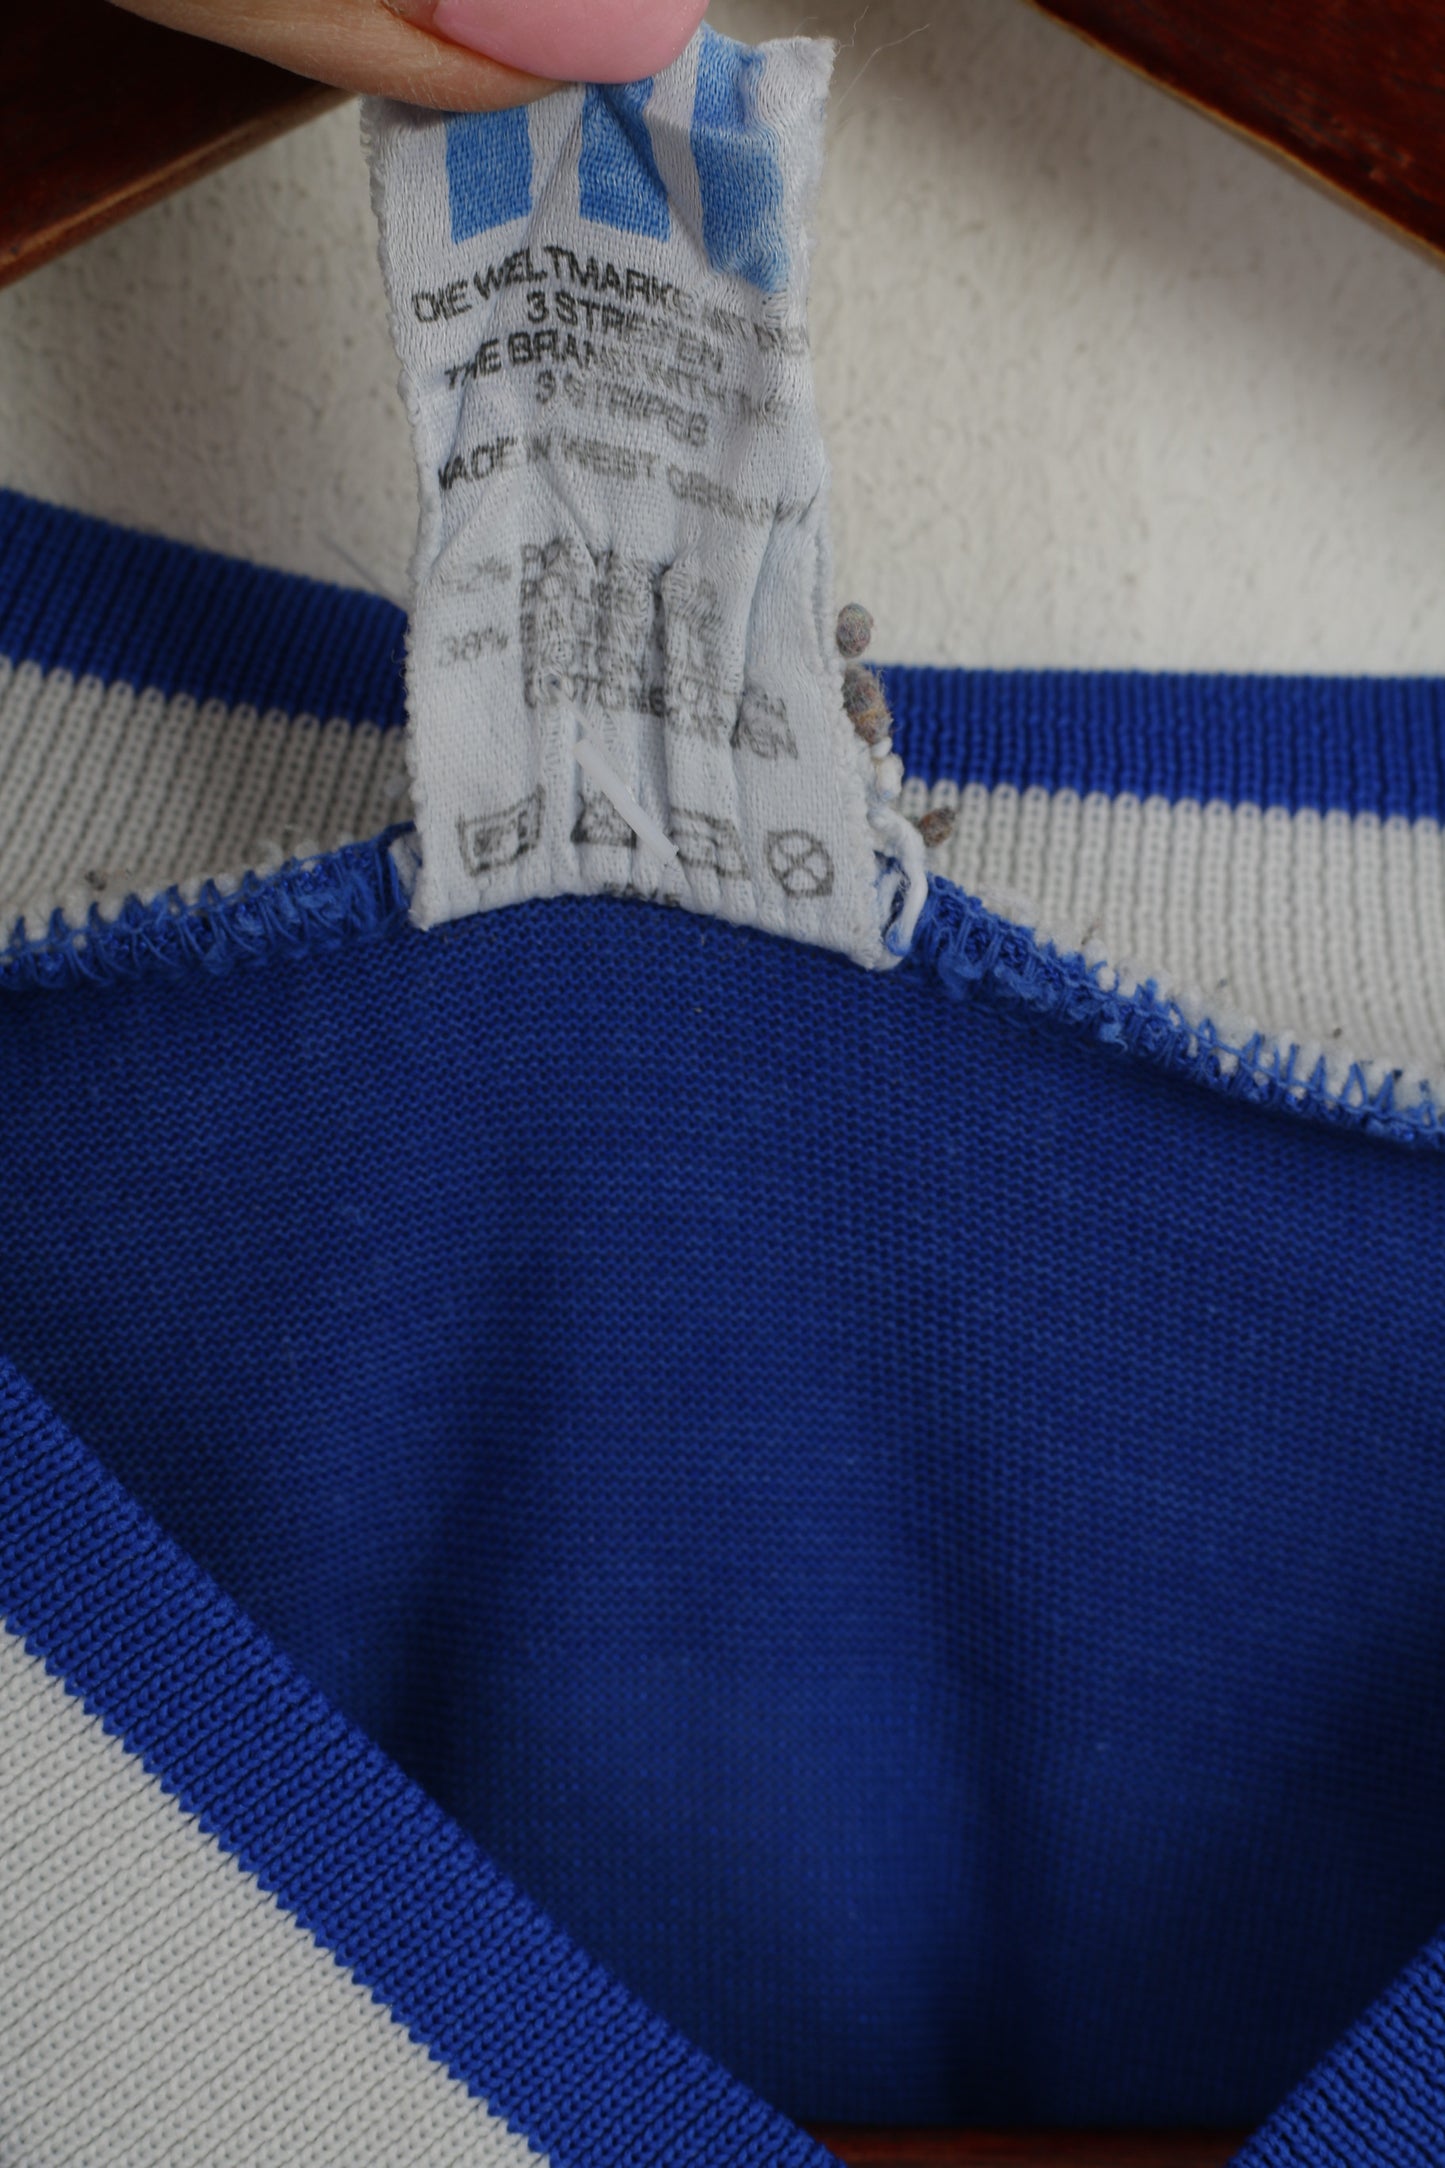 Adidas Homme L (M) Chemise Bleu Ergee #15 vintage Made in West Germany Jersey Top